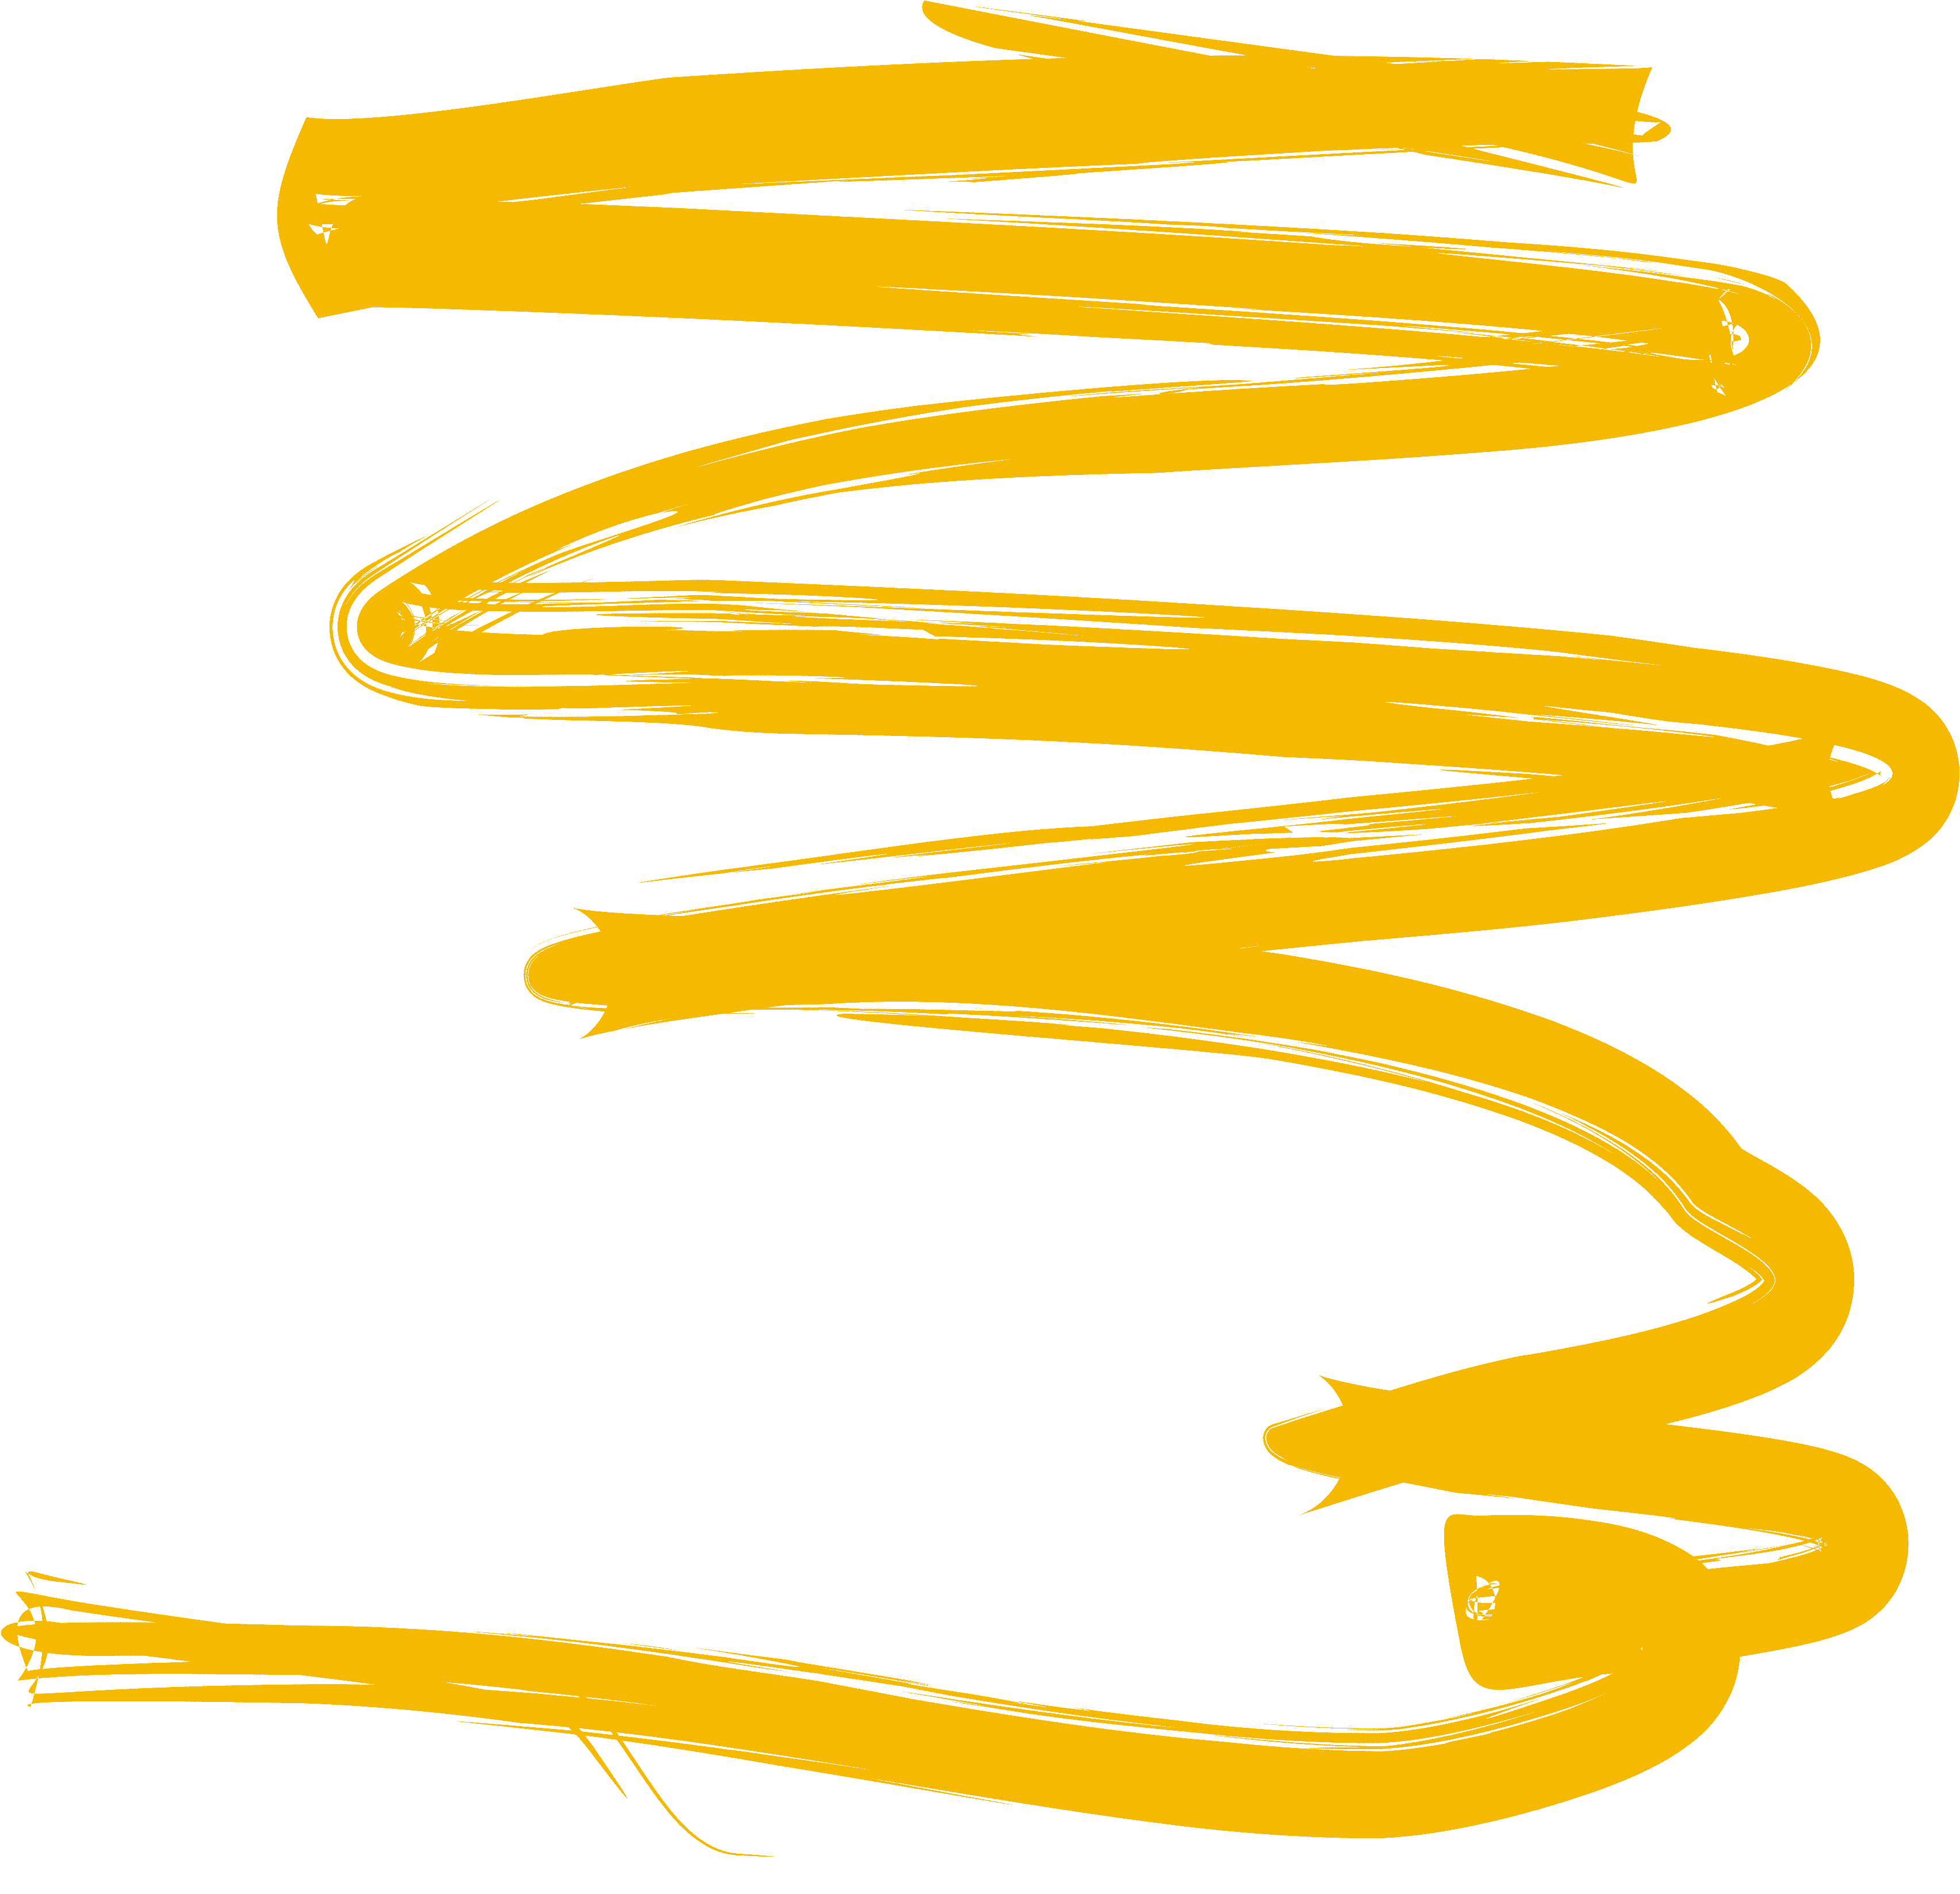 squiggly yellow background graphic